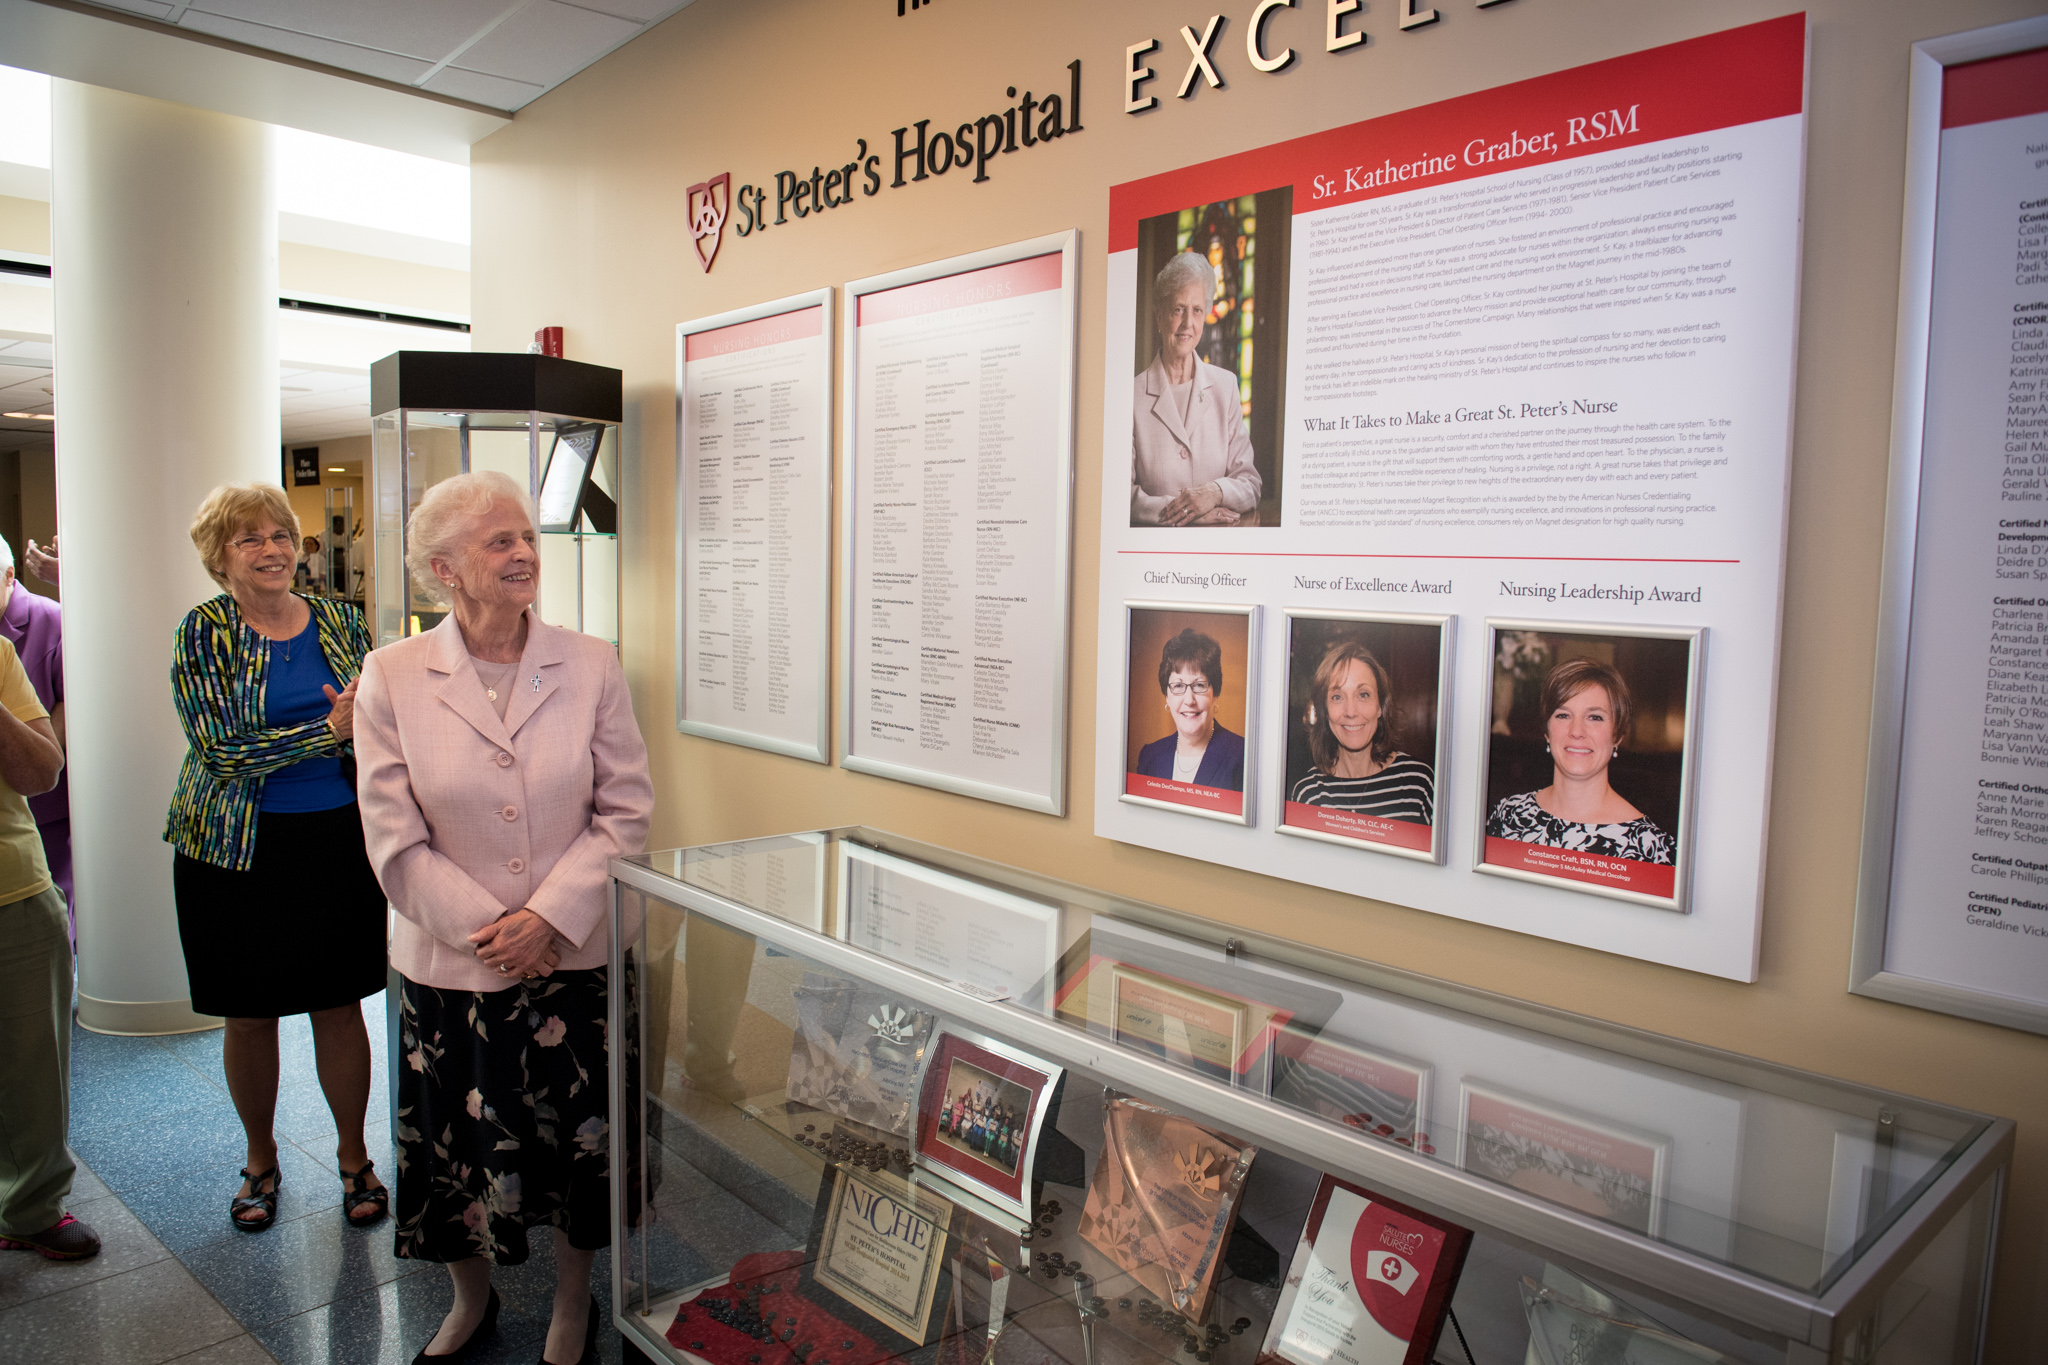 Sister Kay at a St. Peter's Hospital celebration in her honor in 2017. The hospital renamed its Wall of Nursing Excellence the Sister Katherine Graber, RSM, Wall of Distinction. (Photo via: St. Peter's Hospital Foundation)